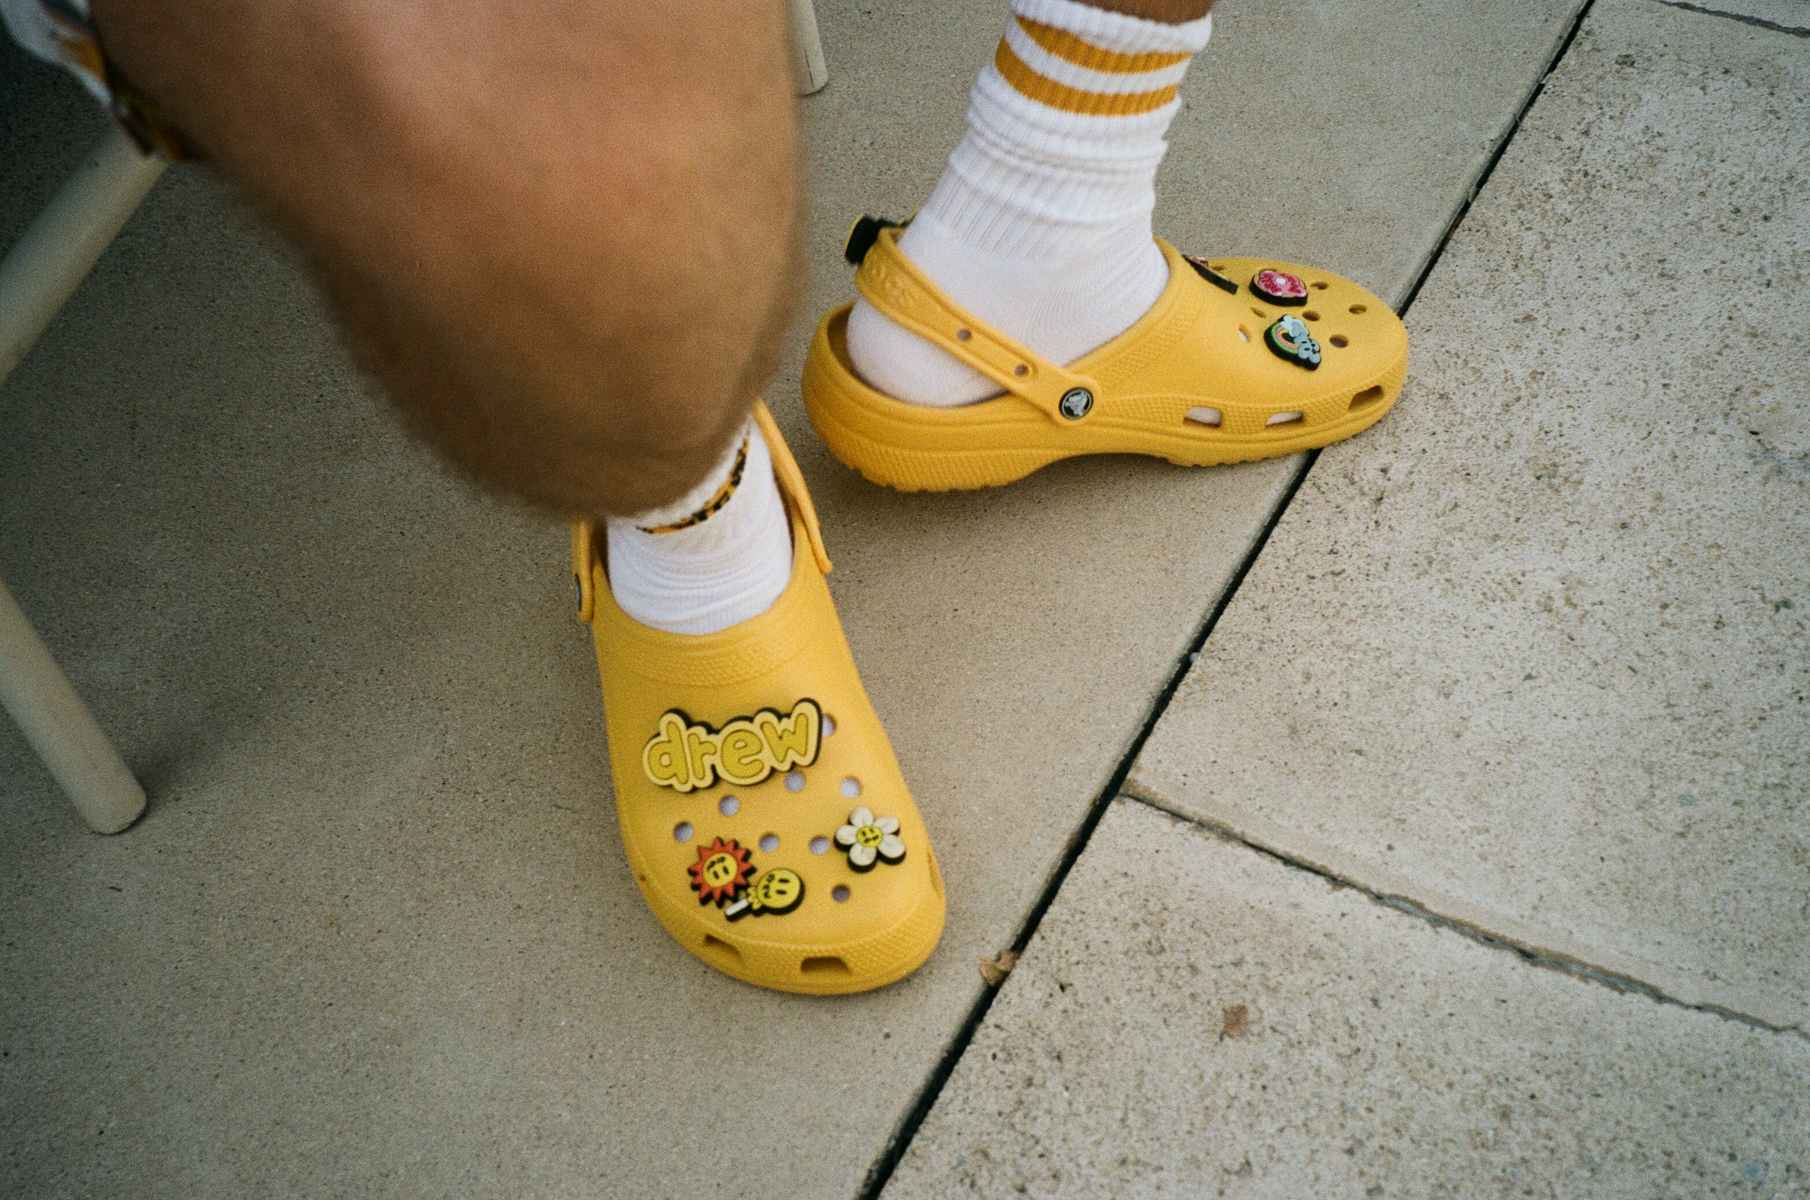 The Ugly Shoe Trend Is Here To Stay Thanks To Crocs